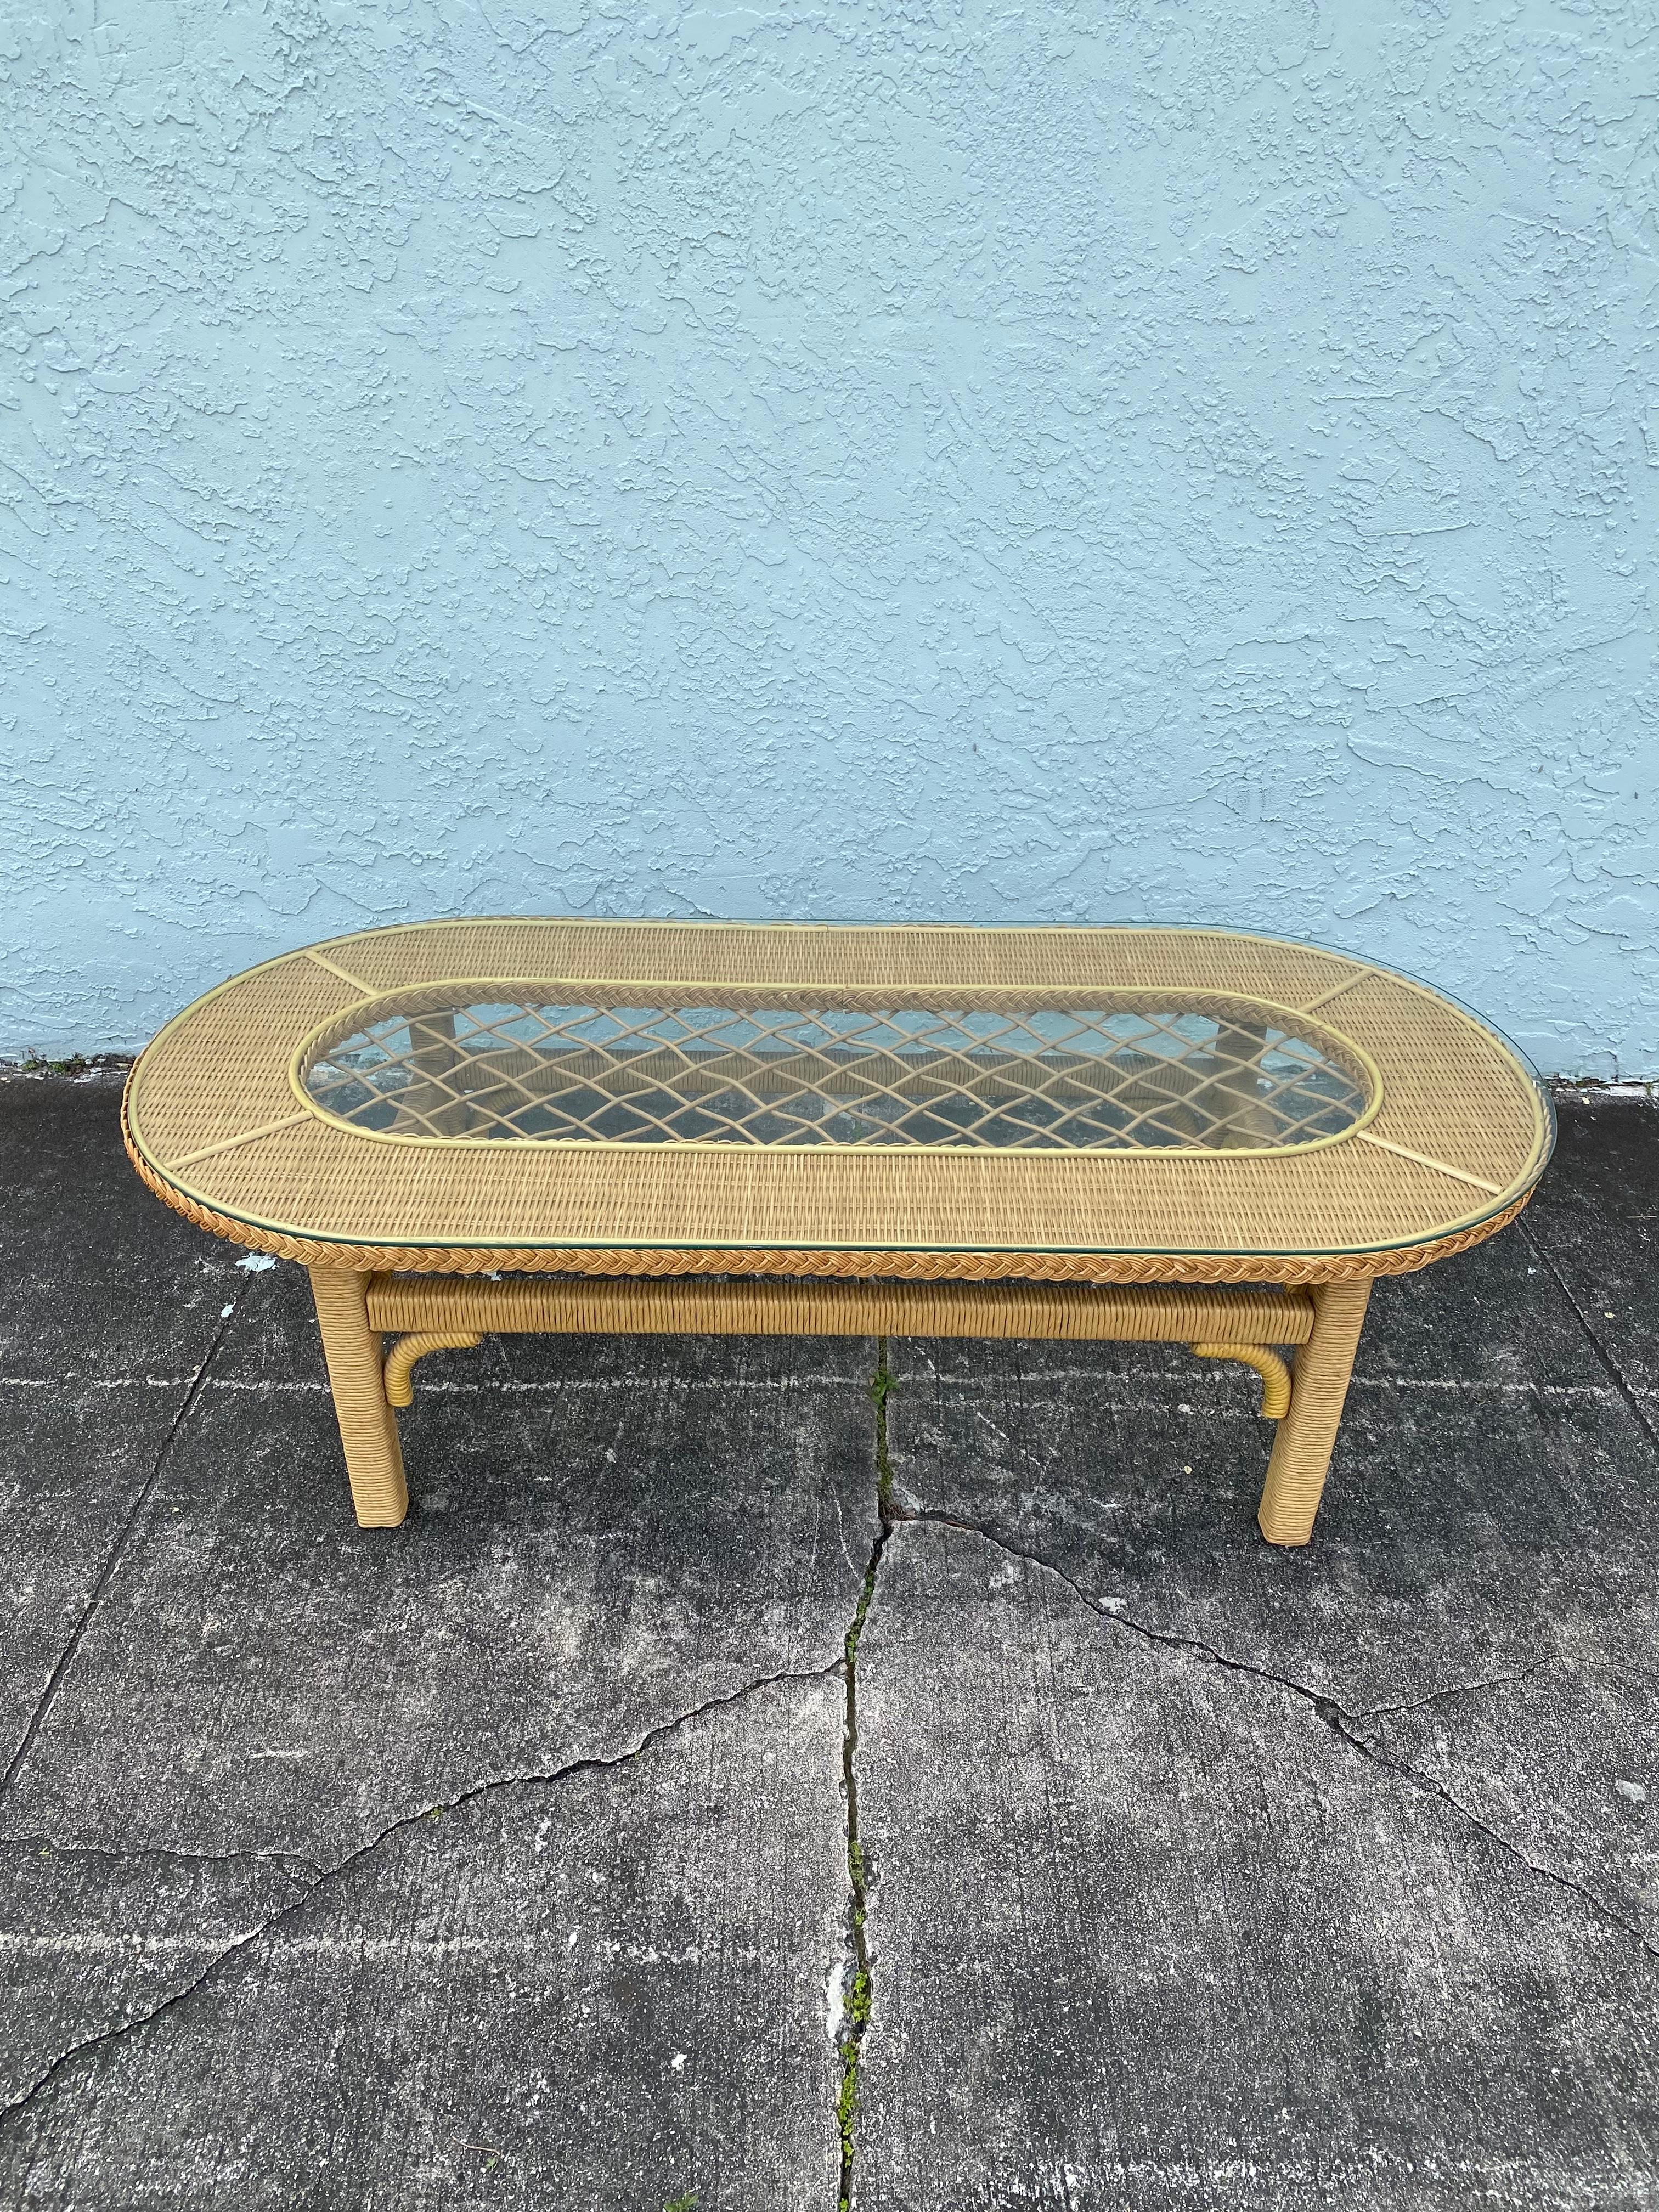 On offer on this occasion is one of the most stunning and rare oval rattan coffee table you could hope to find. Outstanding design is exhibited throughout. The beautiful table is statement piece and packed with personality!  Just look at the